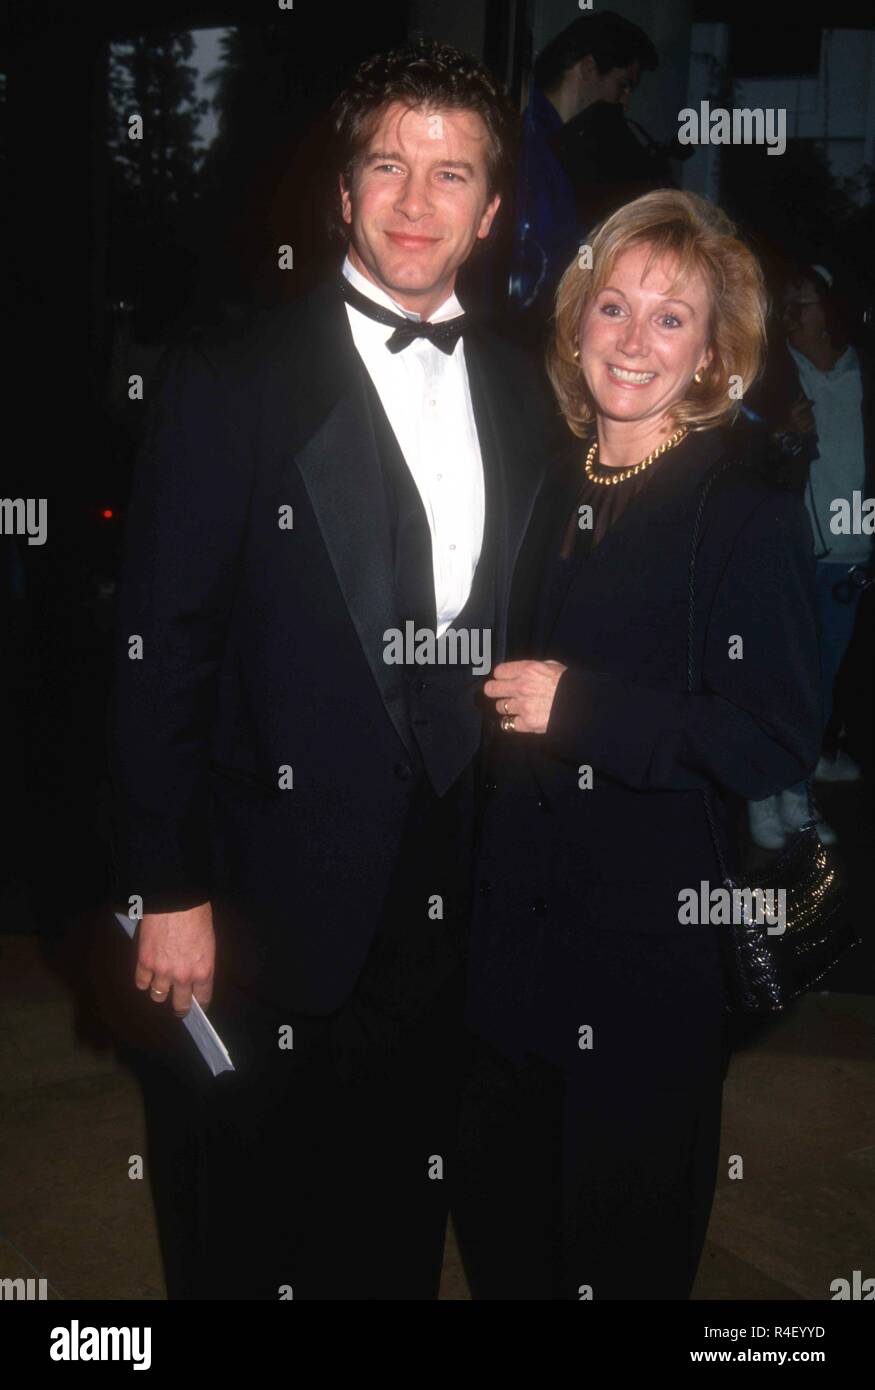 BEVERLY HILLS, CA - FEBRUARY 26: Actors attend the Ninth Annual Soap Opera Digest Awards on February 26, 1993 at the Beverly Hilton Hotel in Beverly Hills, California. Photo by Barry King/Alamy Stock Photo Stock Photo